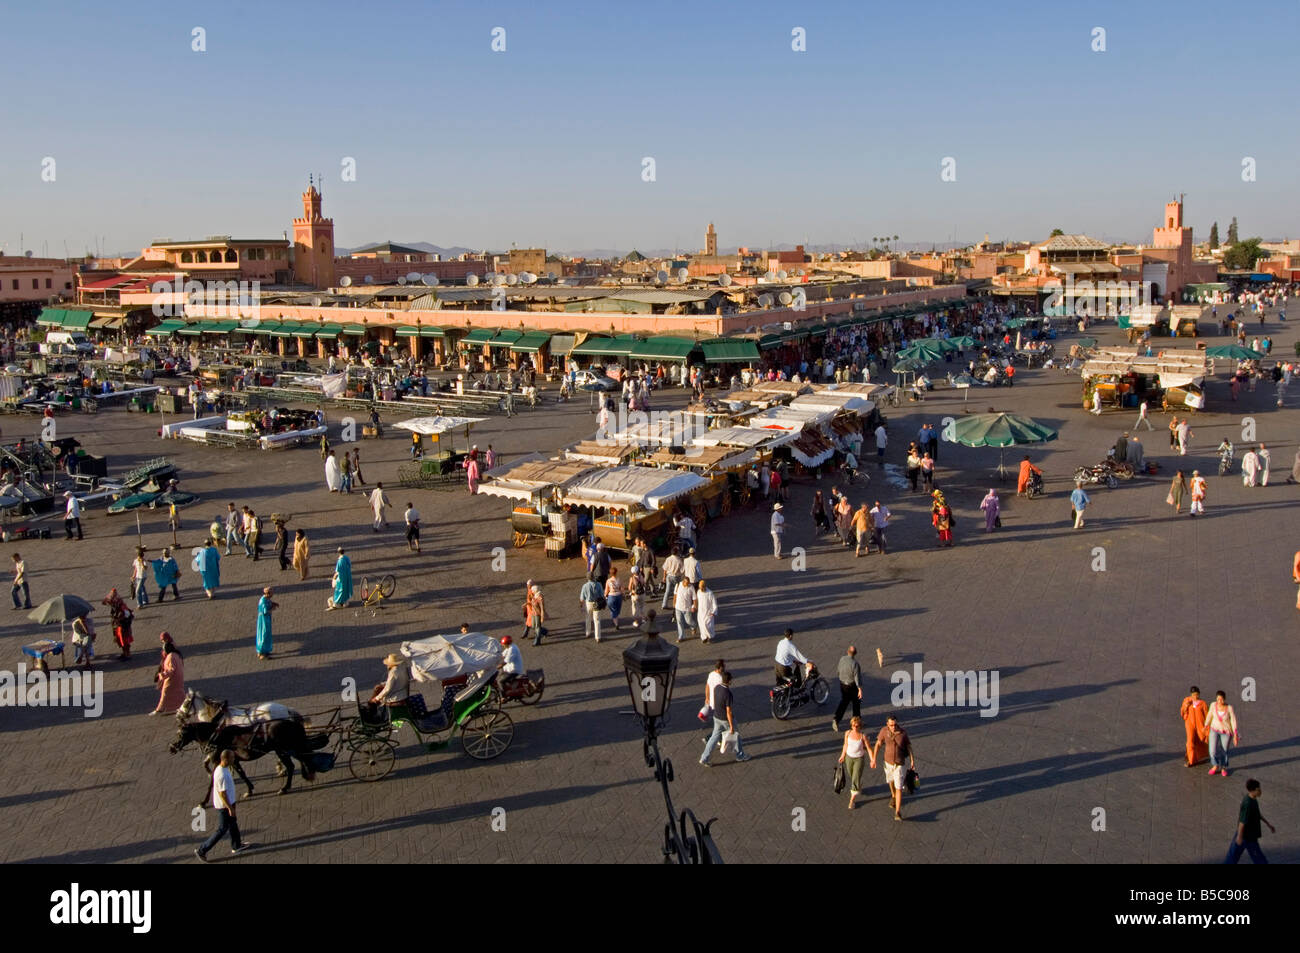 A wide aerial view of the Djemaa El Fna in Marrakesh as it starts to fill up in the late afternoon sun. Stock Photo